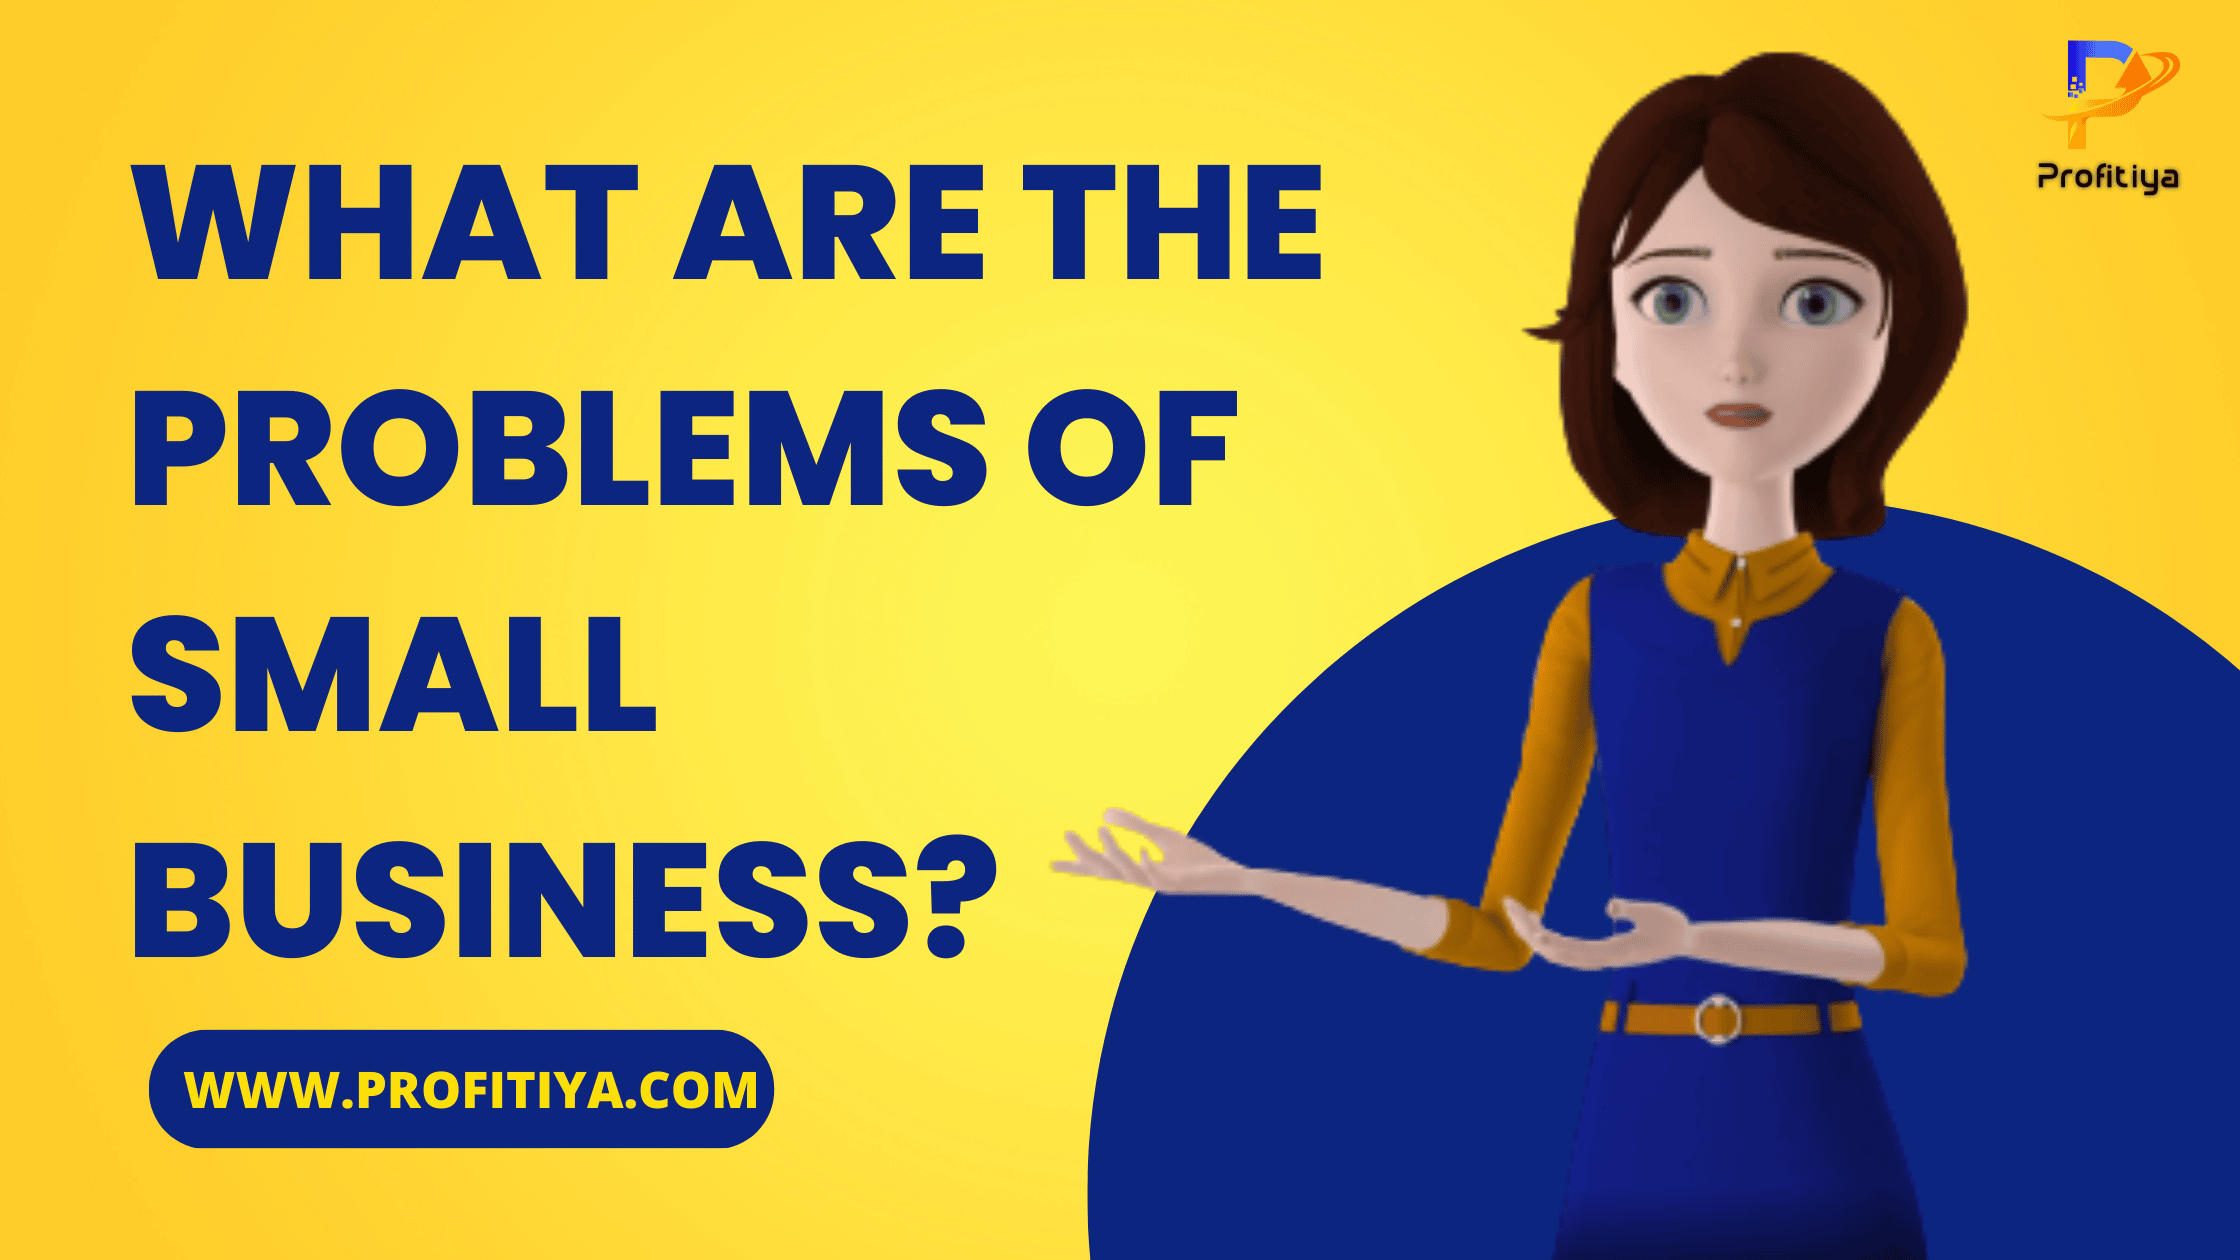 What Are The Problems Of Small Business?